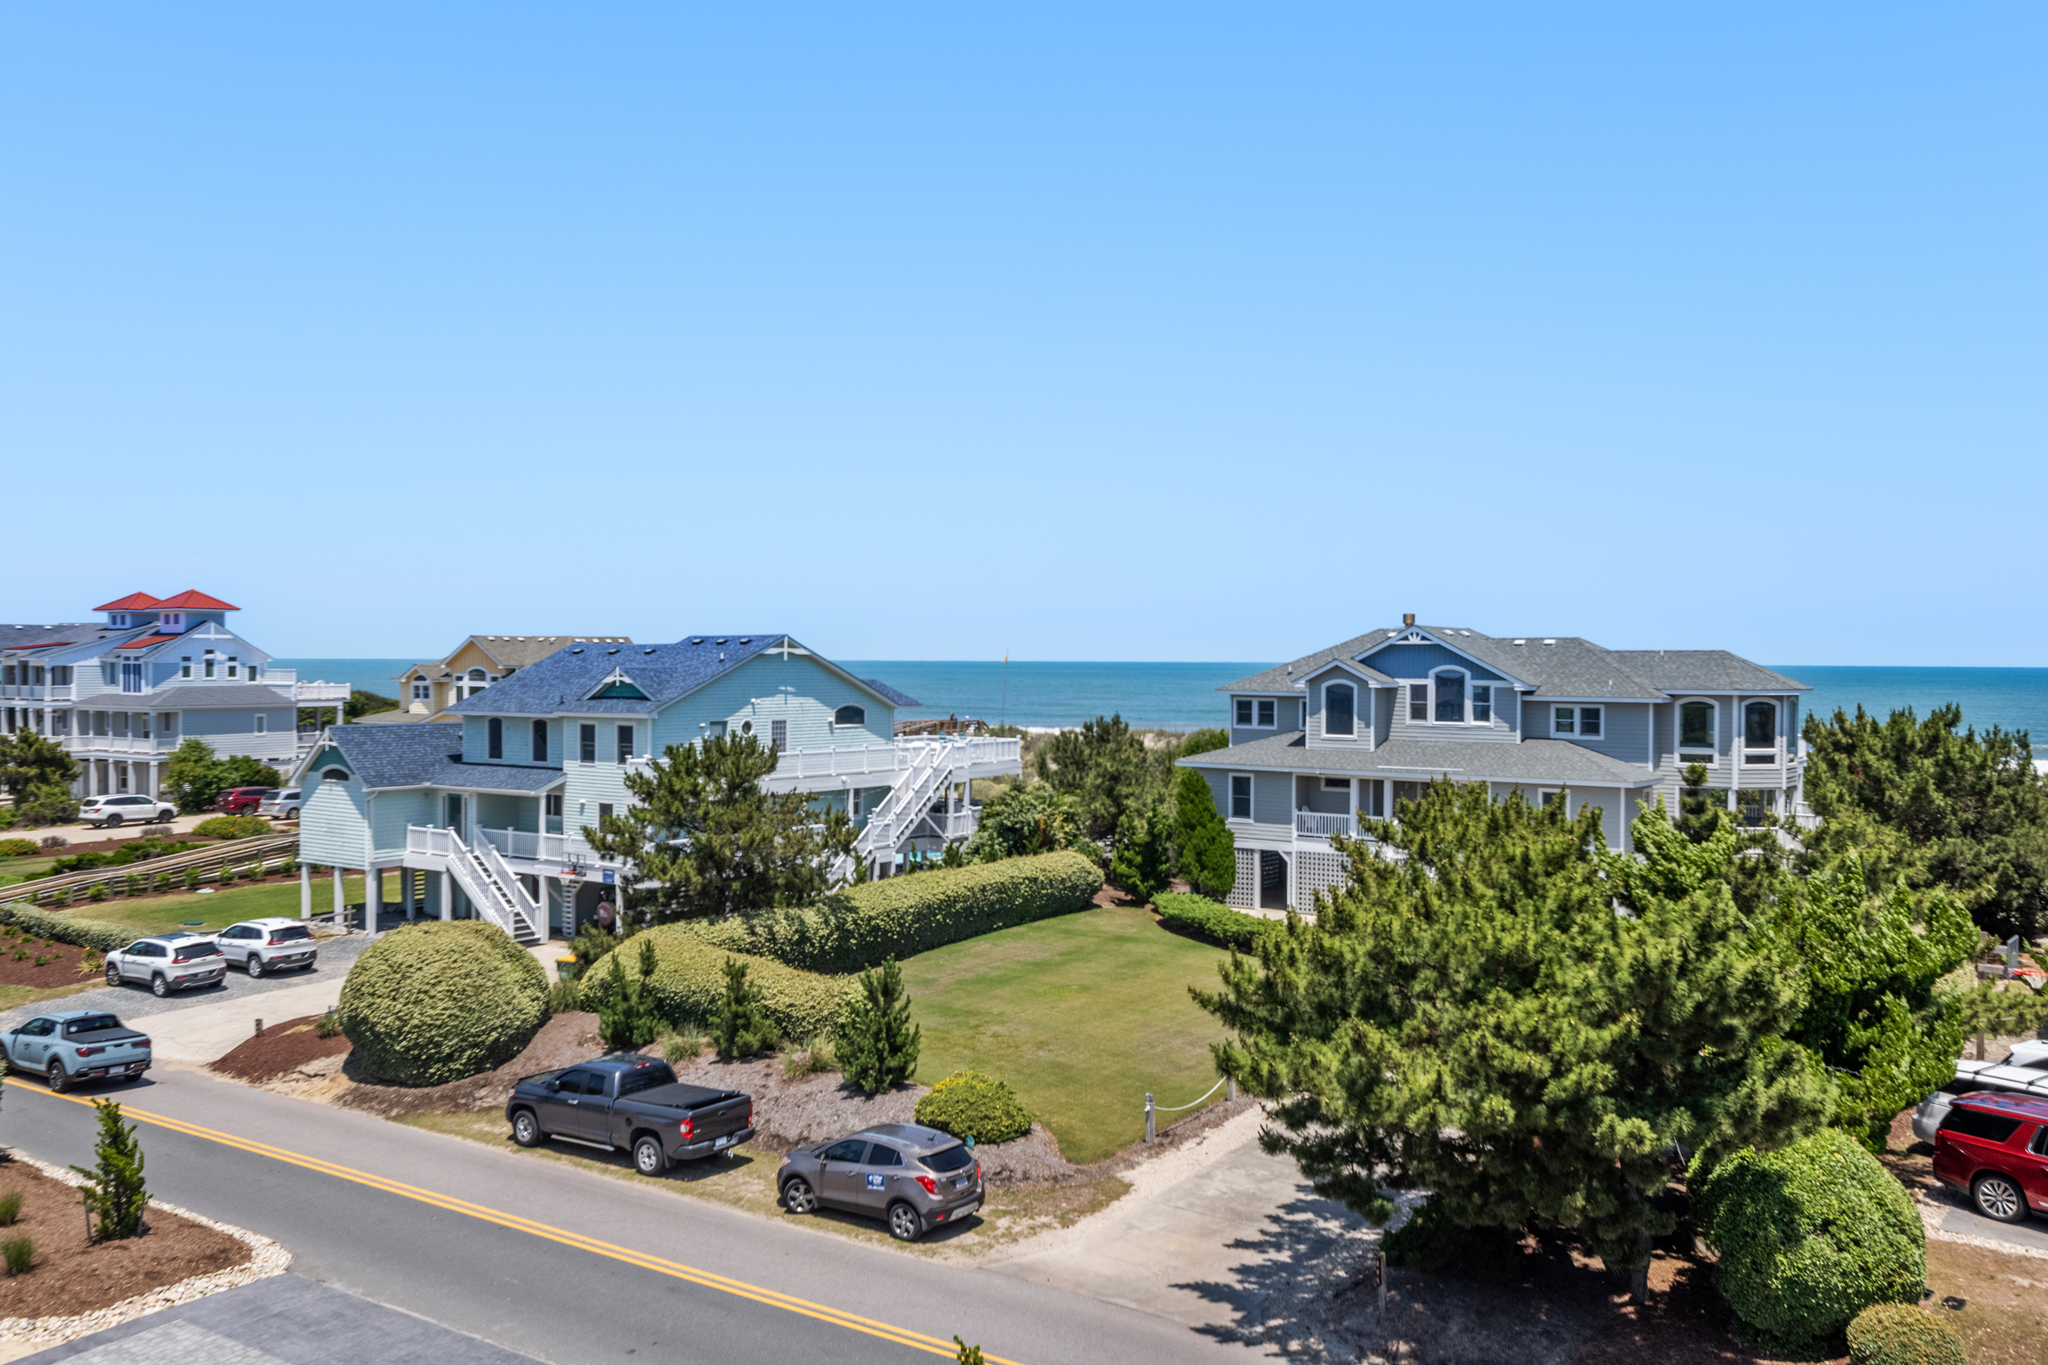 WH786: The OBX One | Top Level Front Deck View